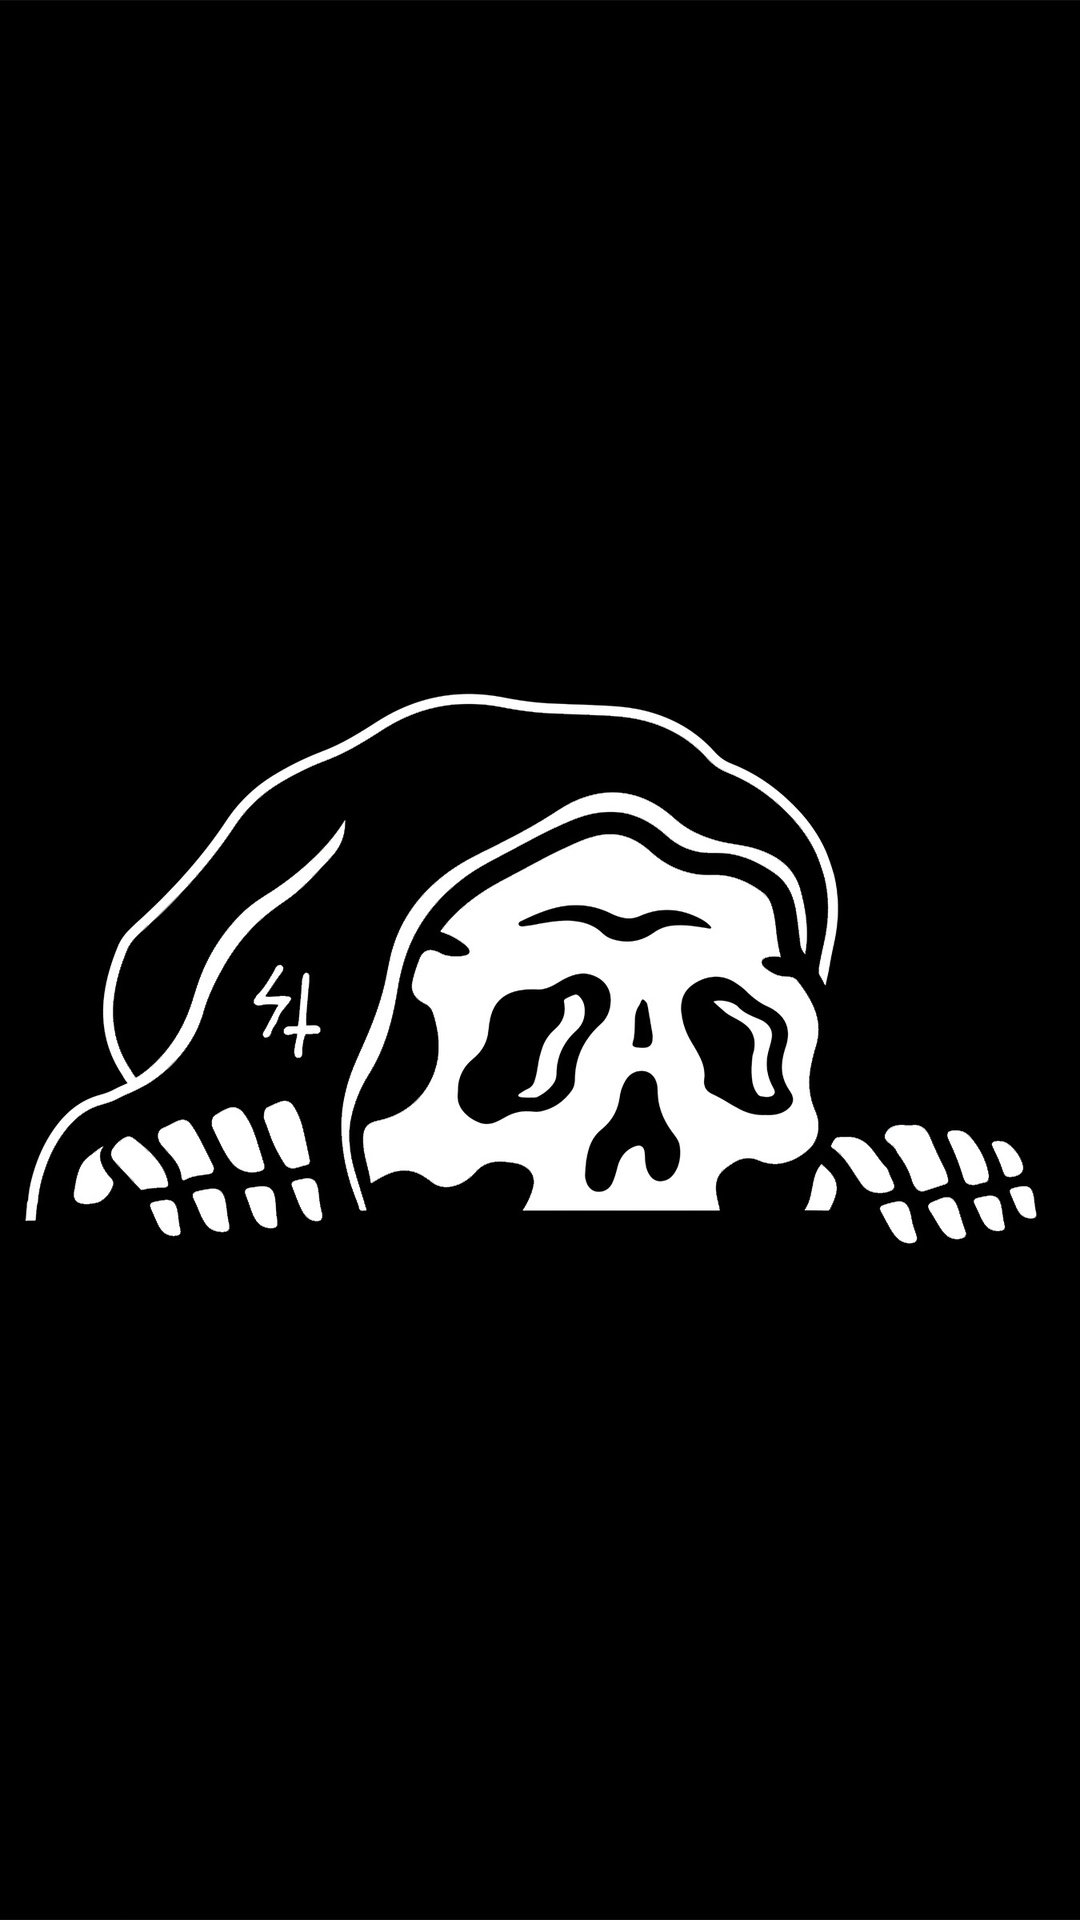 Skull Dark Black Minimal 4k iPhone 6s, 6 Plus, Pixel xl , One Plus 3t, 5 HD 4k Wallpaper, Image, Background, Photo and Picture